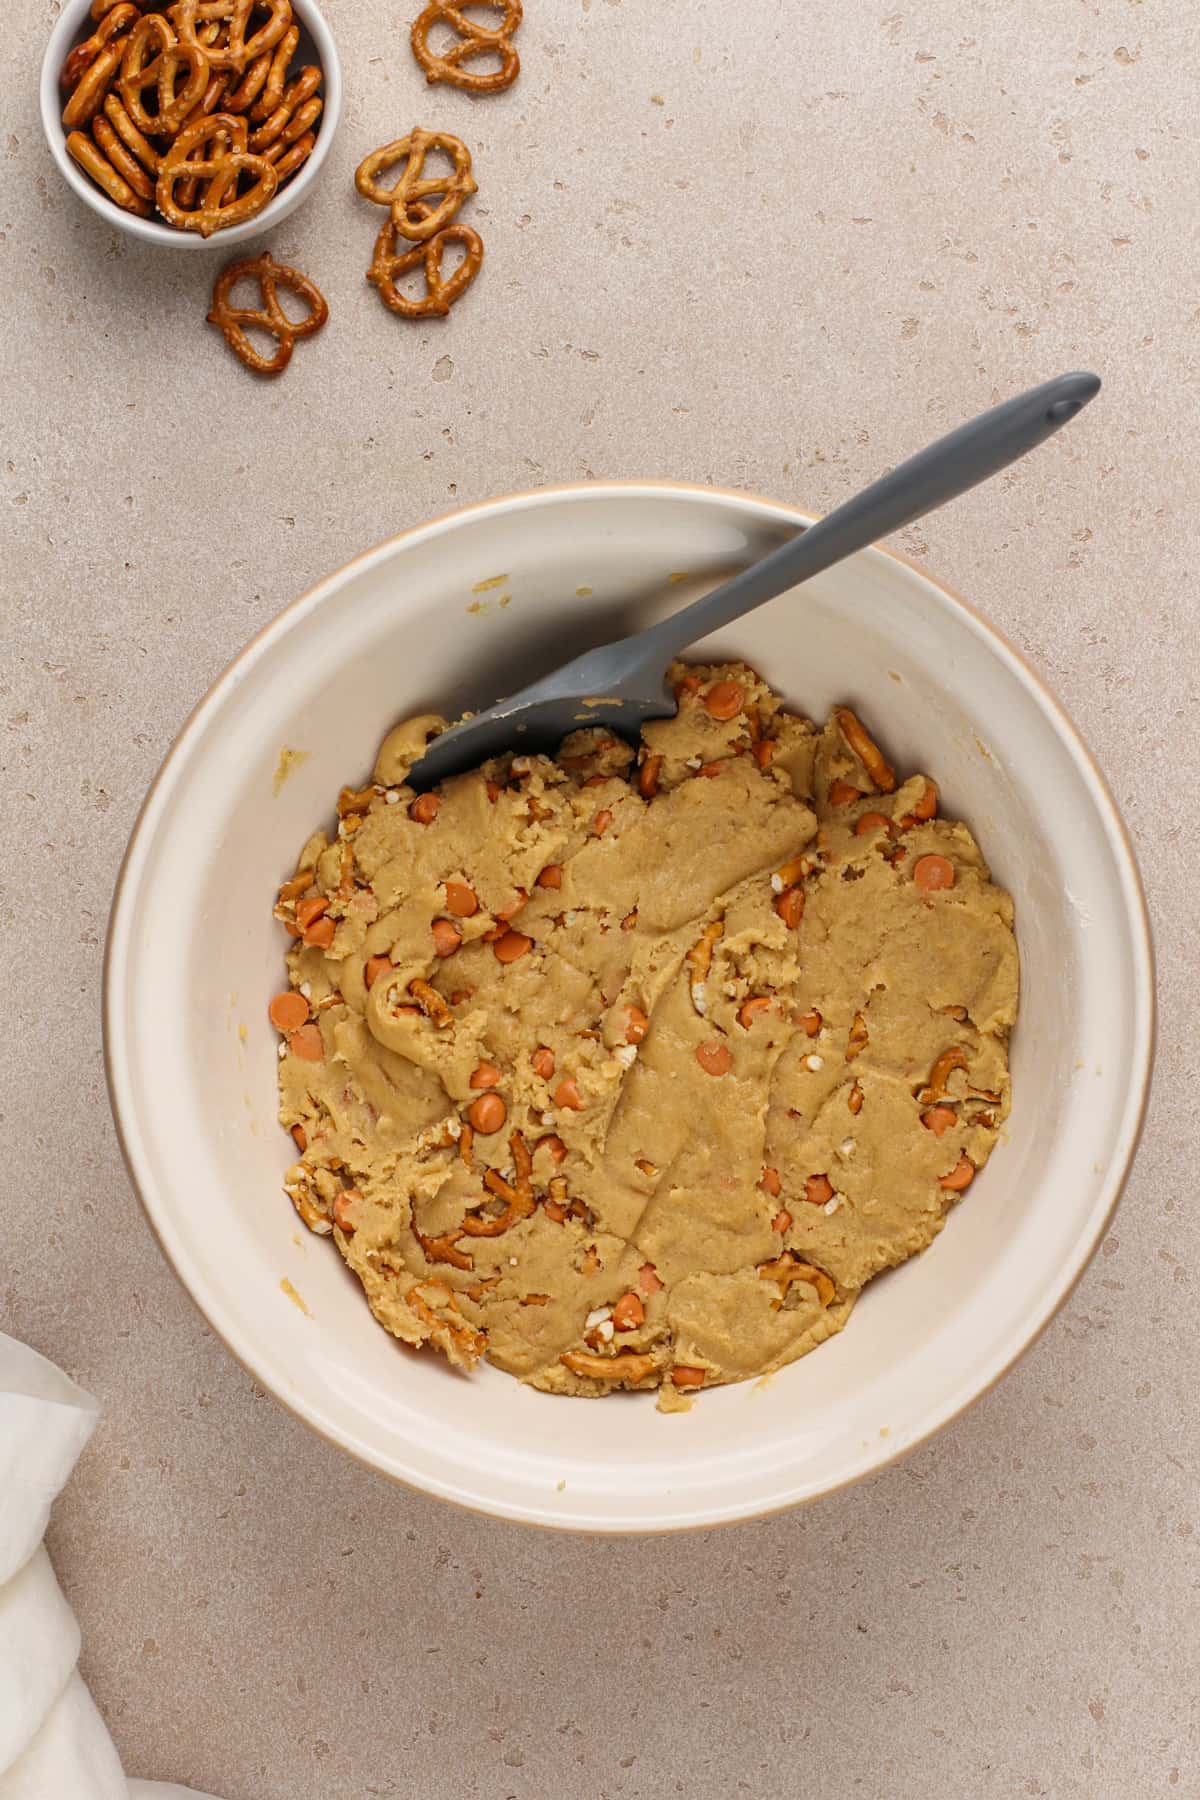 Cookie dough for salted caramel pretzel cookies in a white mixing bowl.